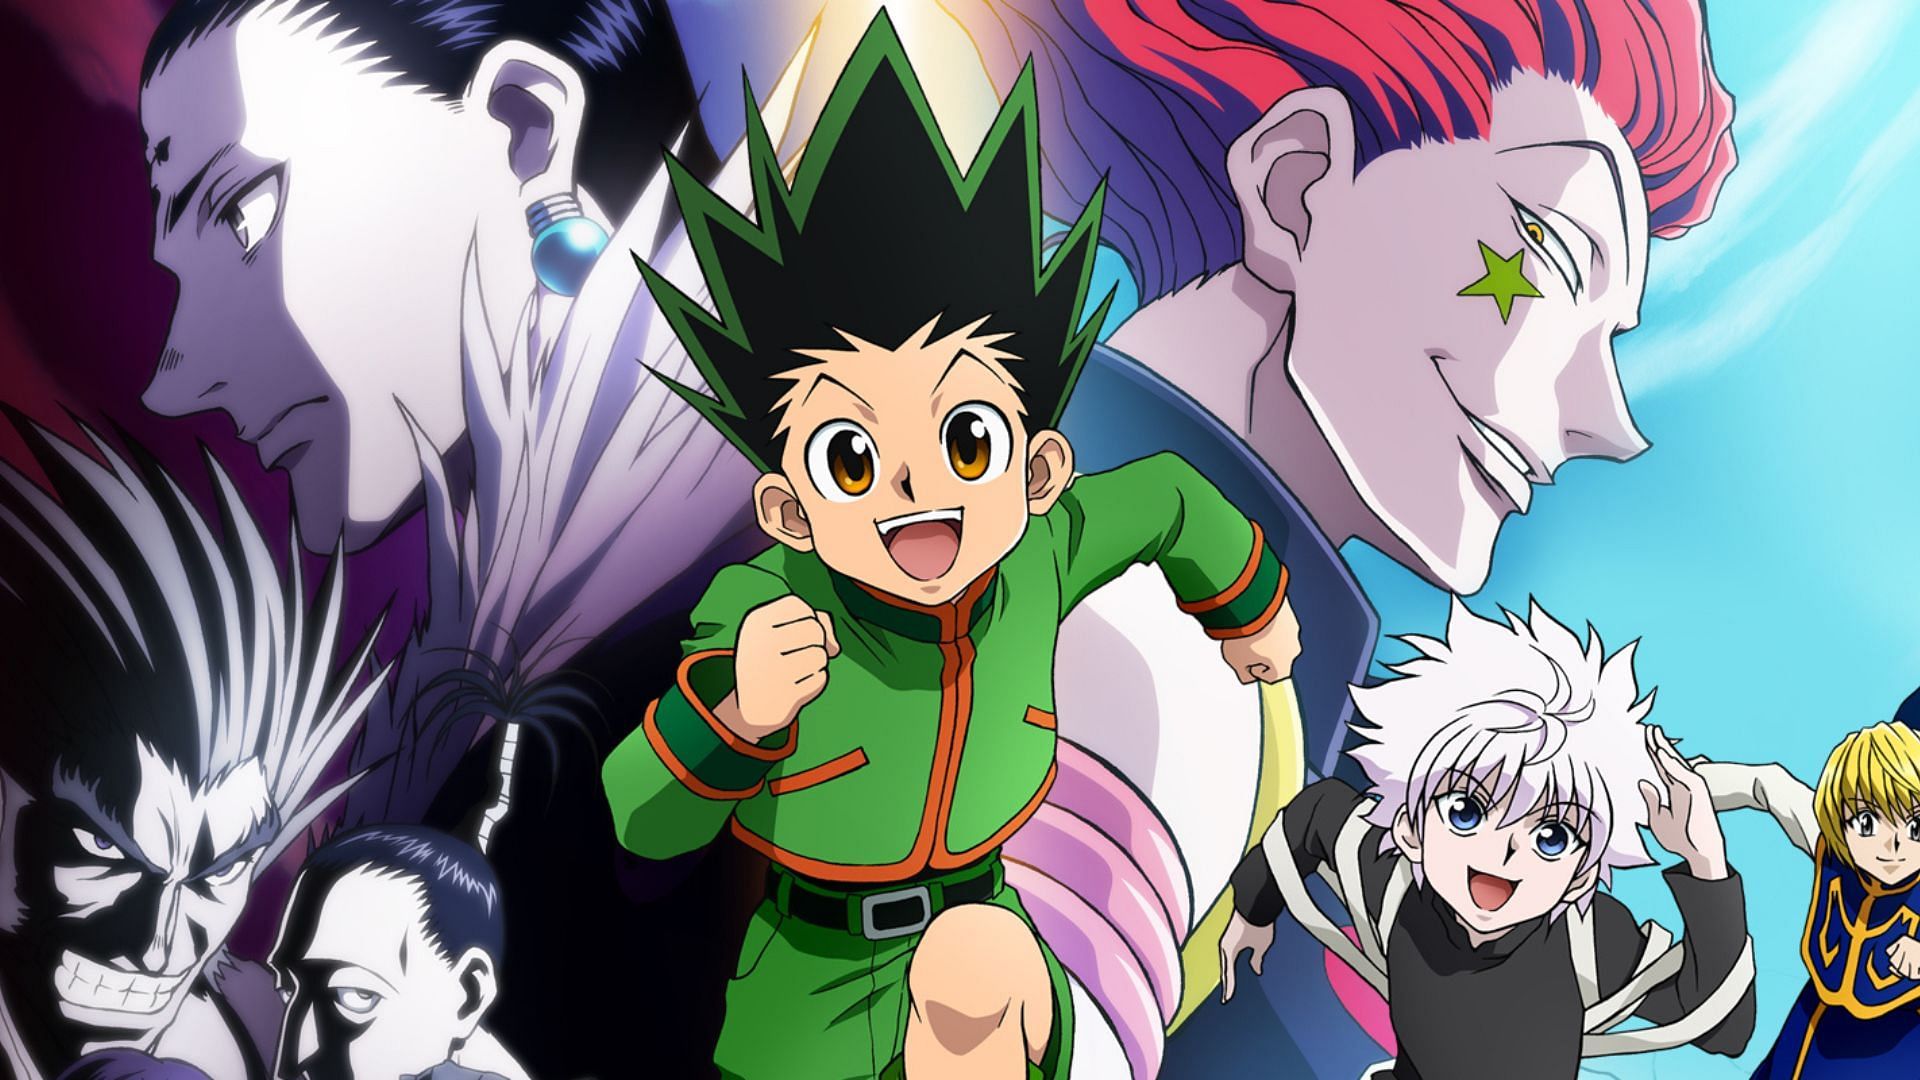 Where Does the Anime End in the Hunter x Hunter Manga?